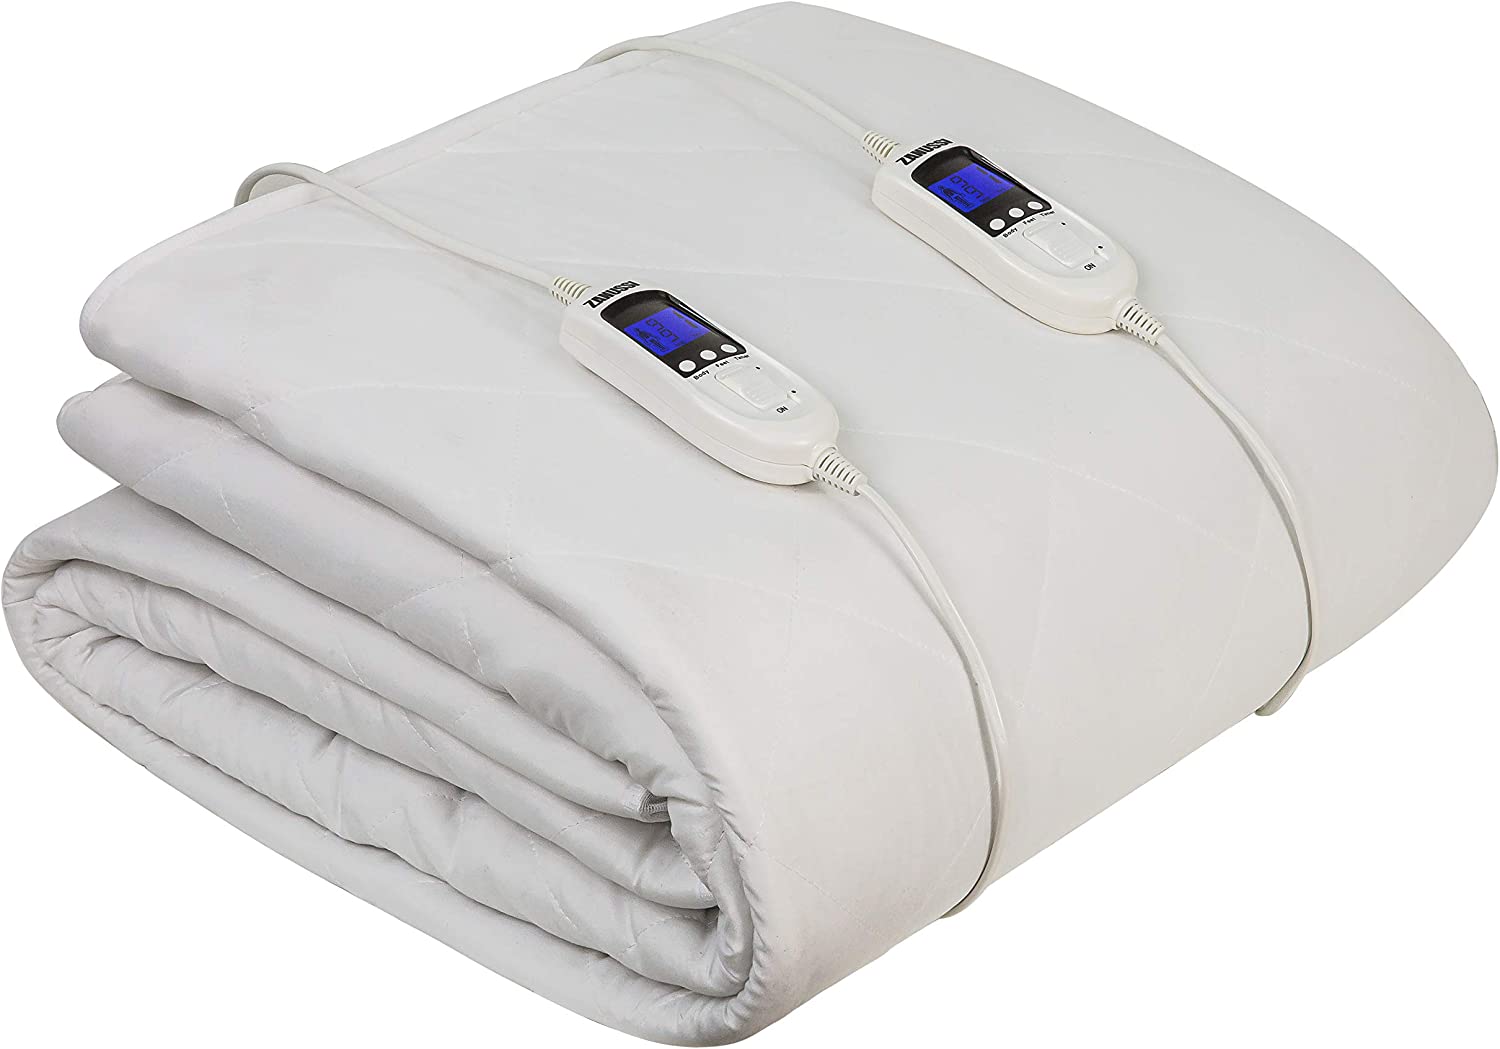 Zanussi King Electric Heated Blanket with 9 Heat Settings and Timer